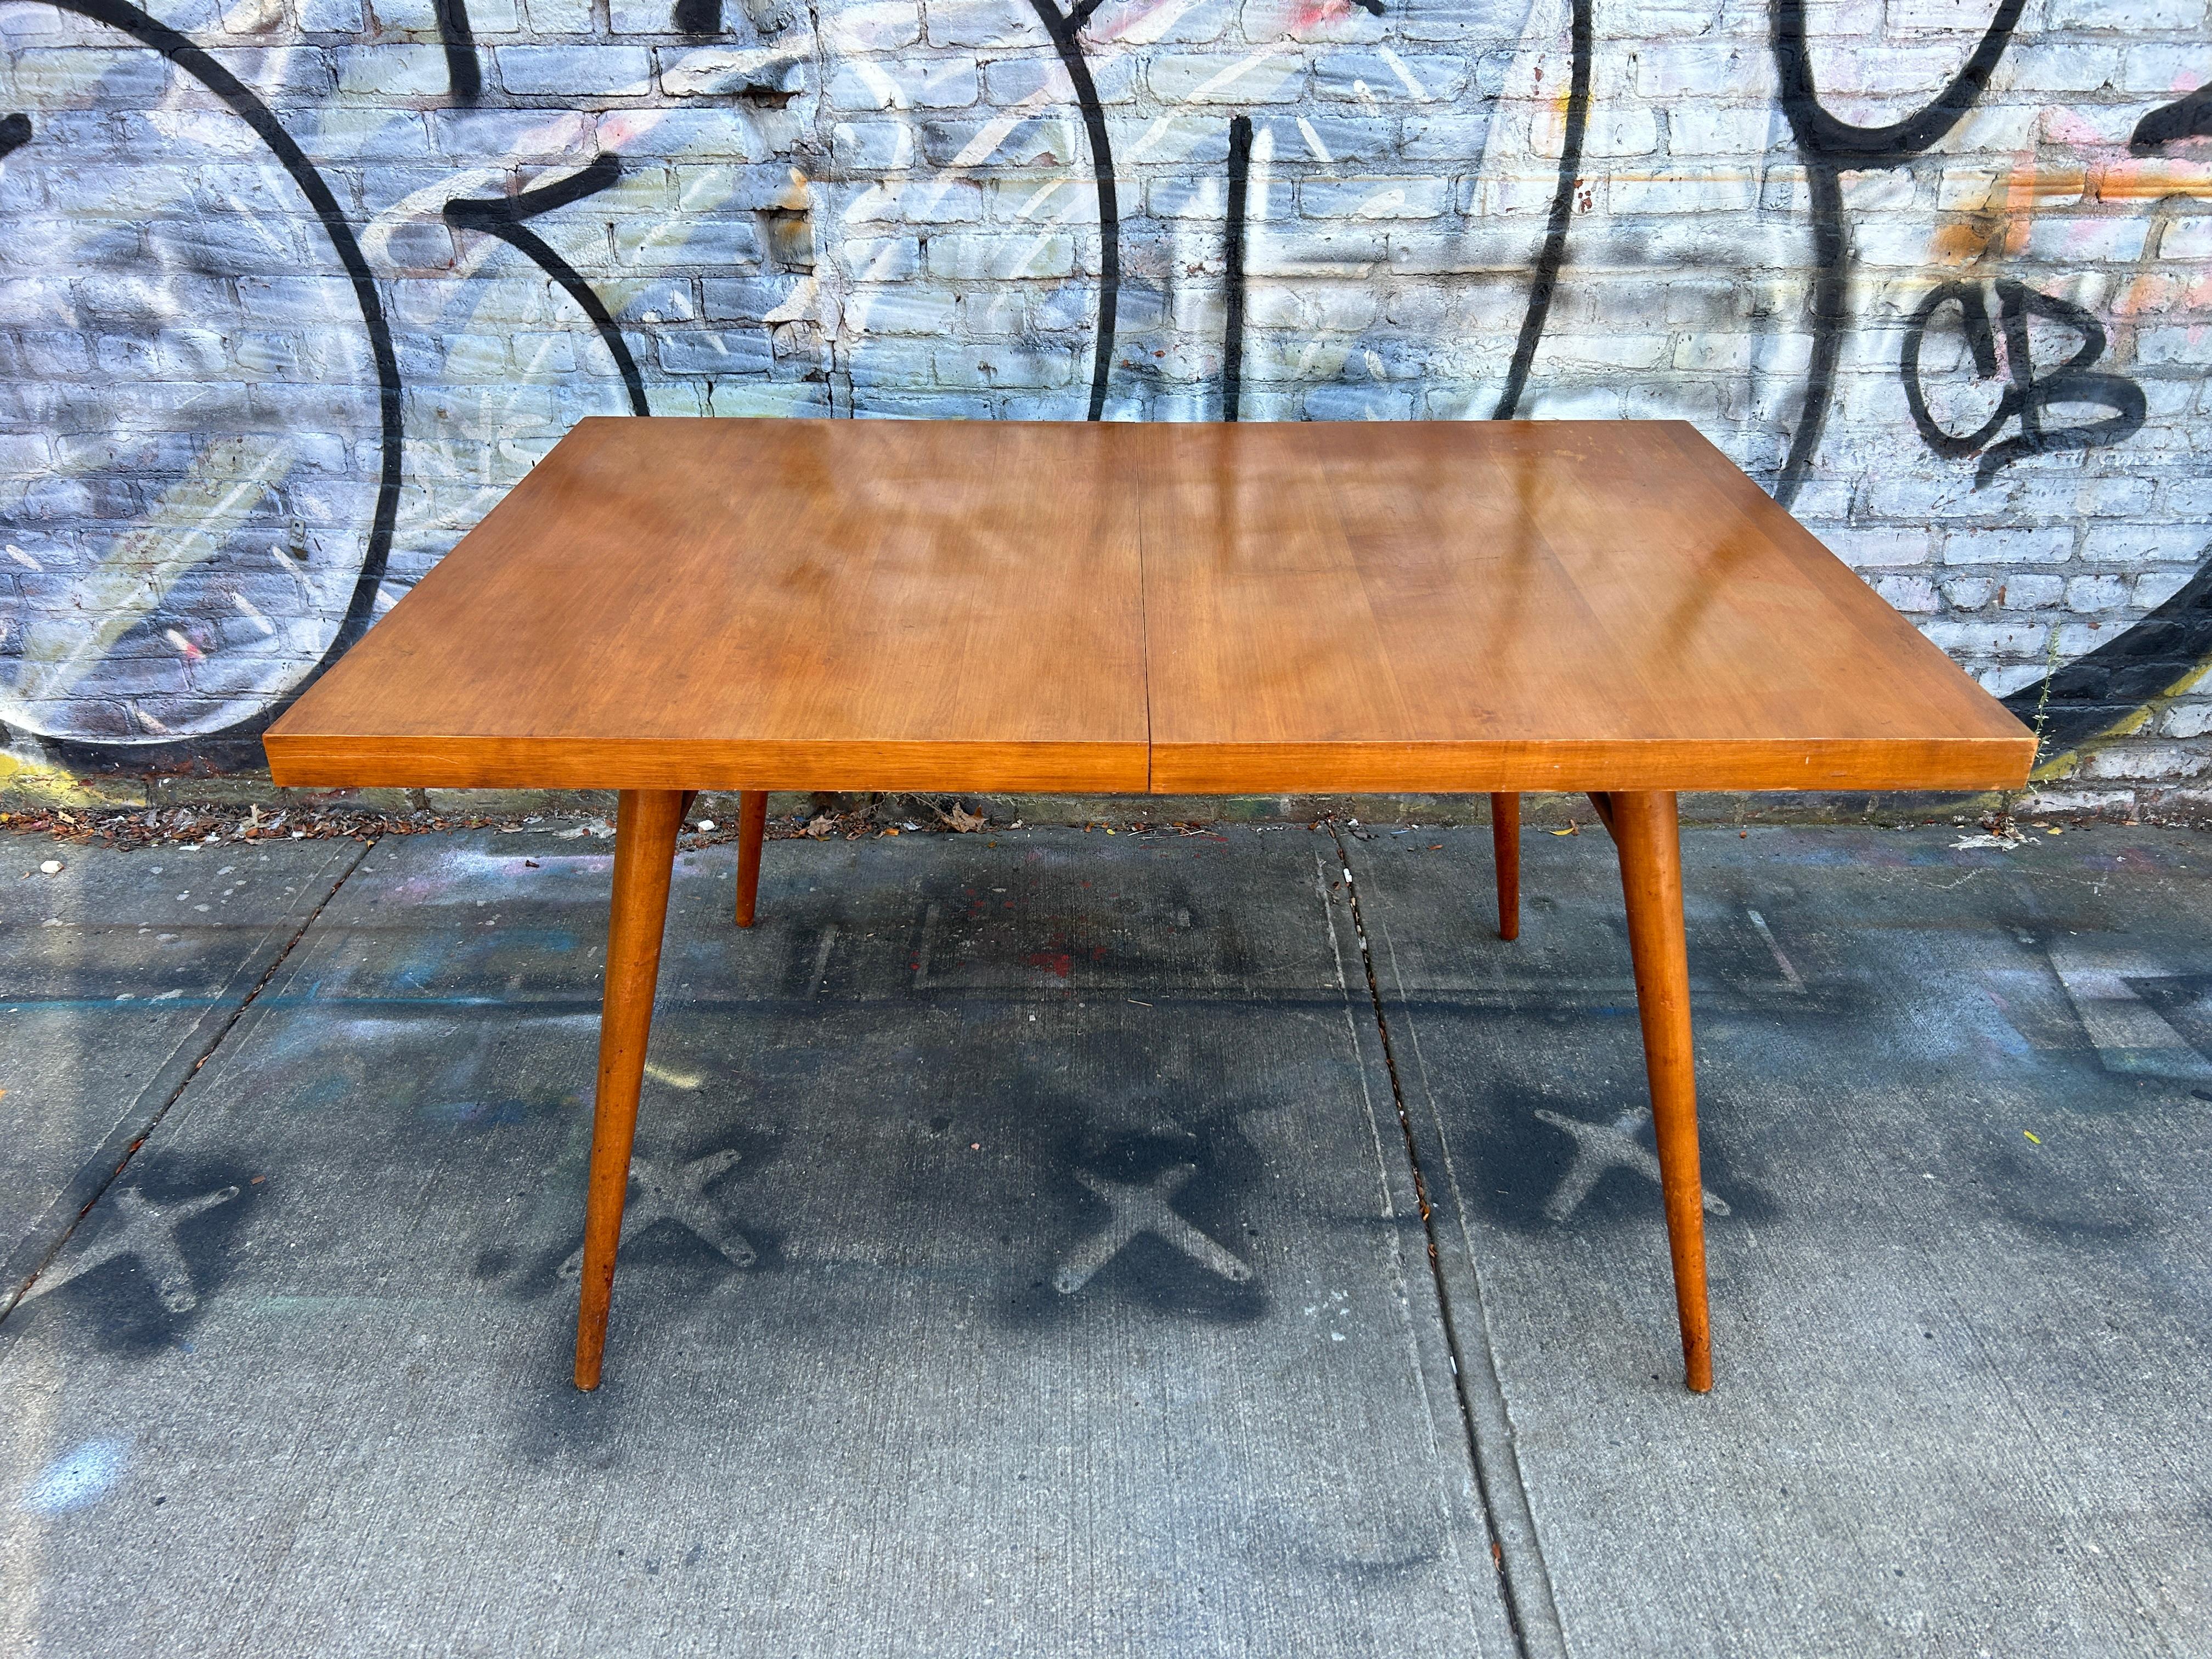 Beautiful early 1950s Paul McCobb maple dining table #1522 with 4 tapered legs and dowel supports. Original maple tabletop with a blonde tobacco finish in good vintage condition. Legs unbolt - easy to move. You are buying (1) dining table with (2)